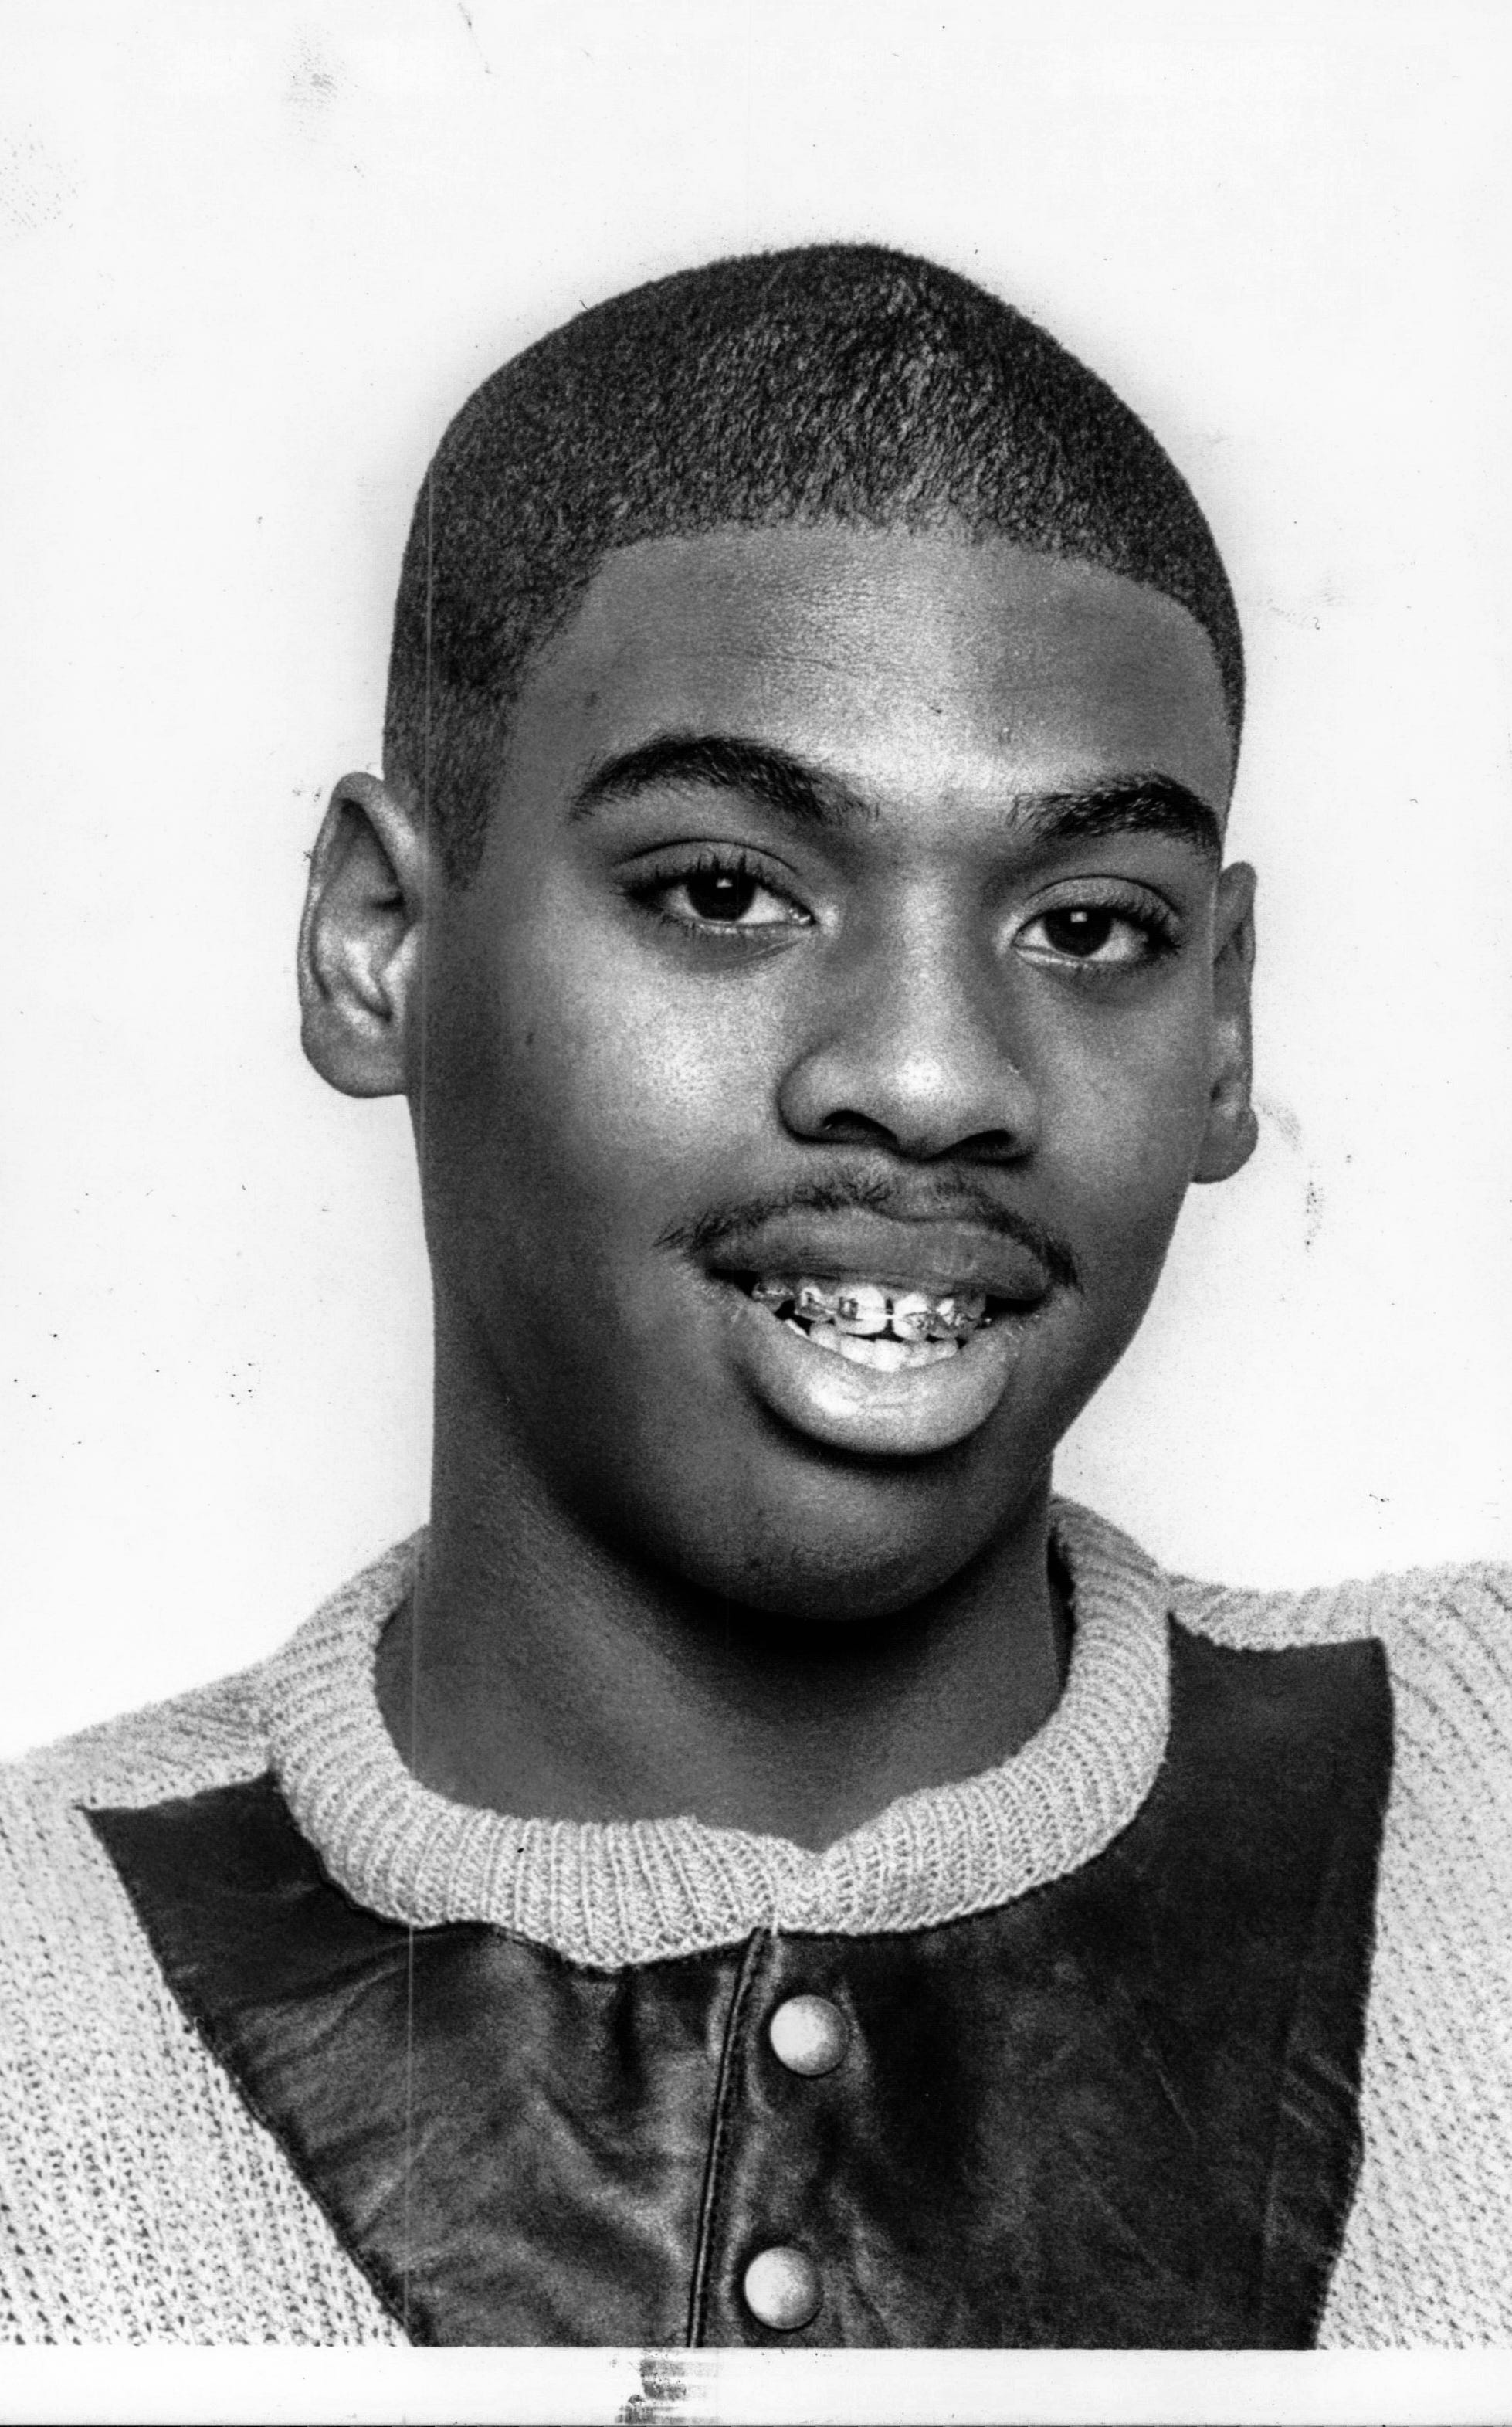 Before he walked the sidelines as the head boys basketball coach at Cass Tech, Steve Hall was a standout point guard for the Technicians. The Class of 1988 product set school scoring records for points in a career and points in a season, which included averaging 30.7 points per game during his senior campaign.